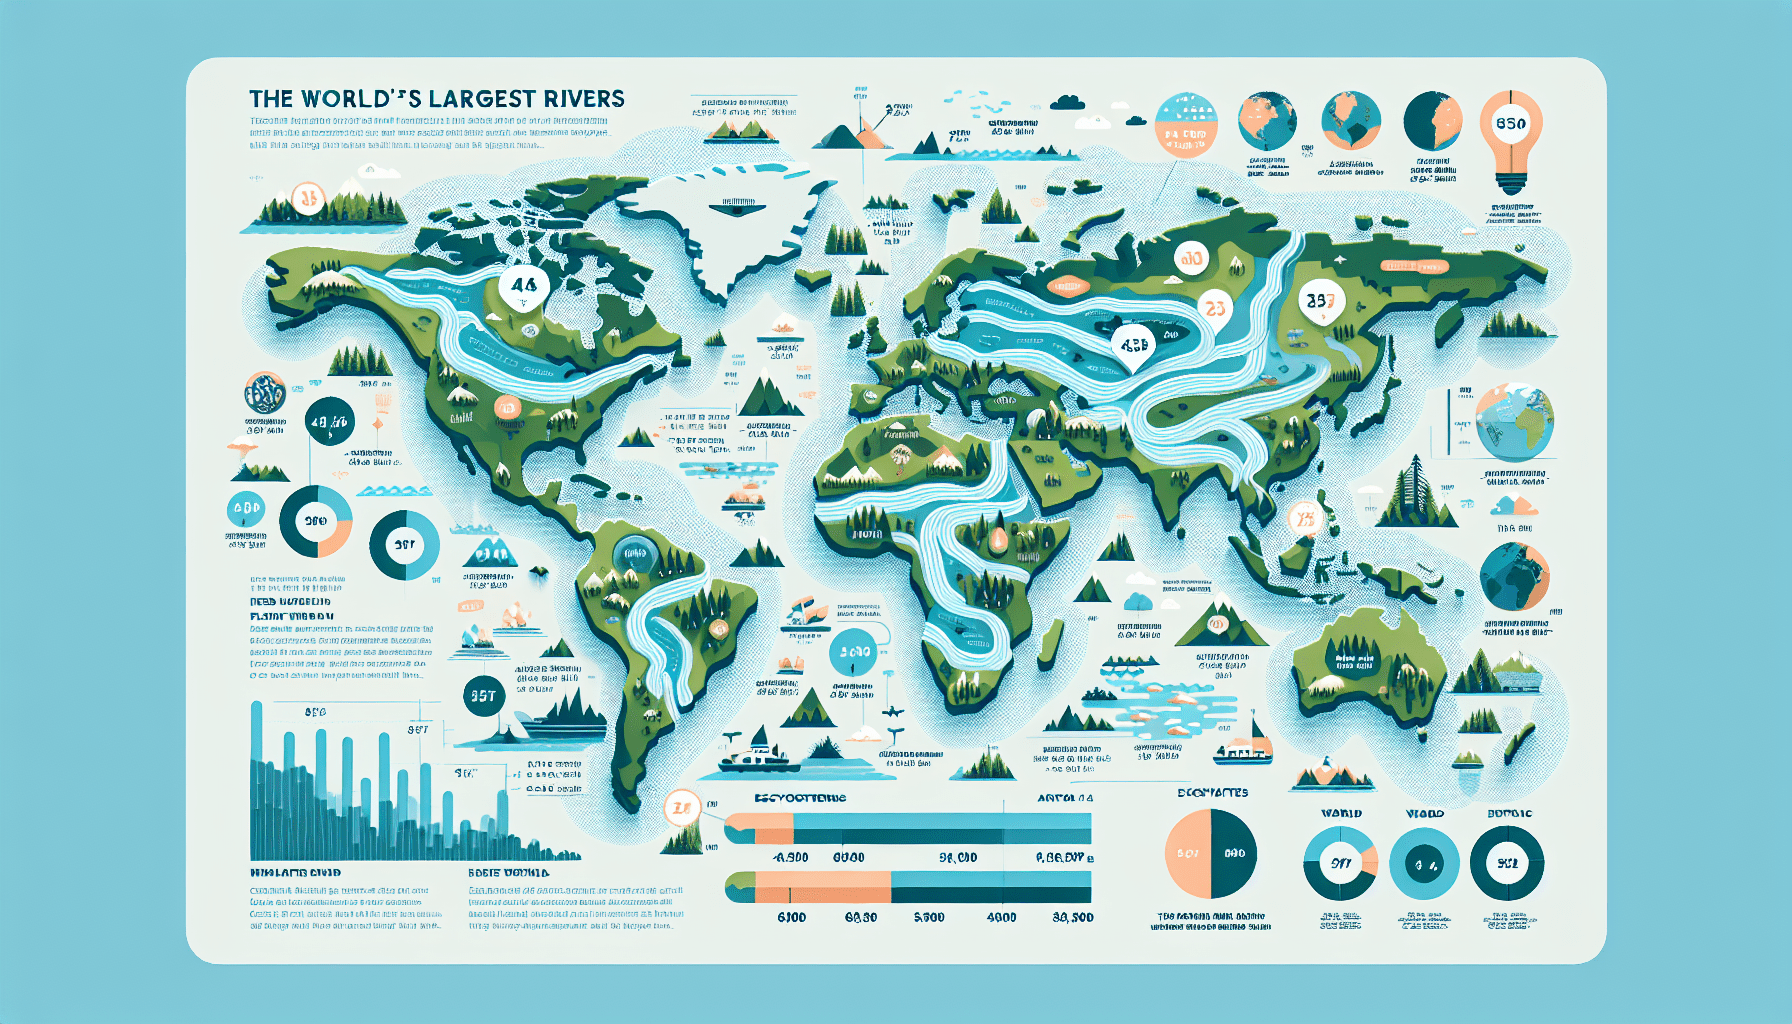 Who Is The Largest River?